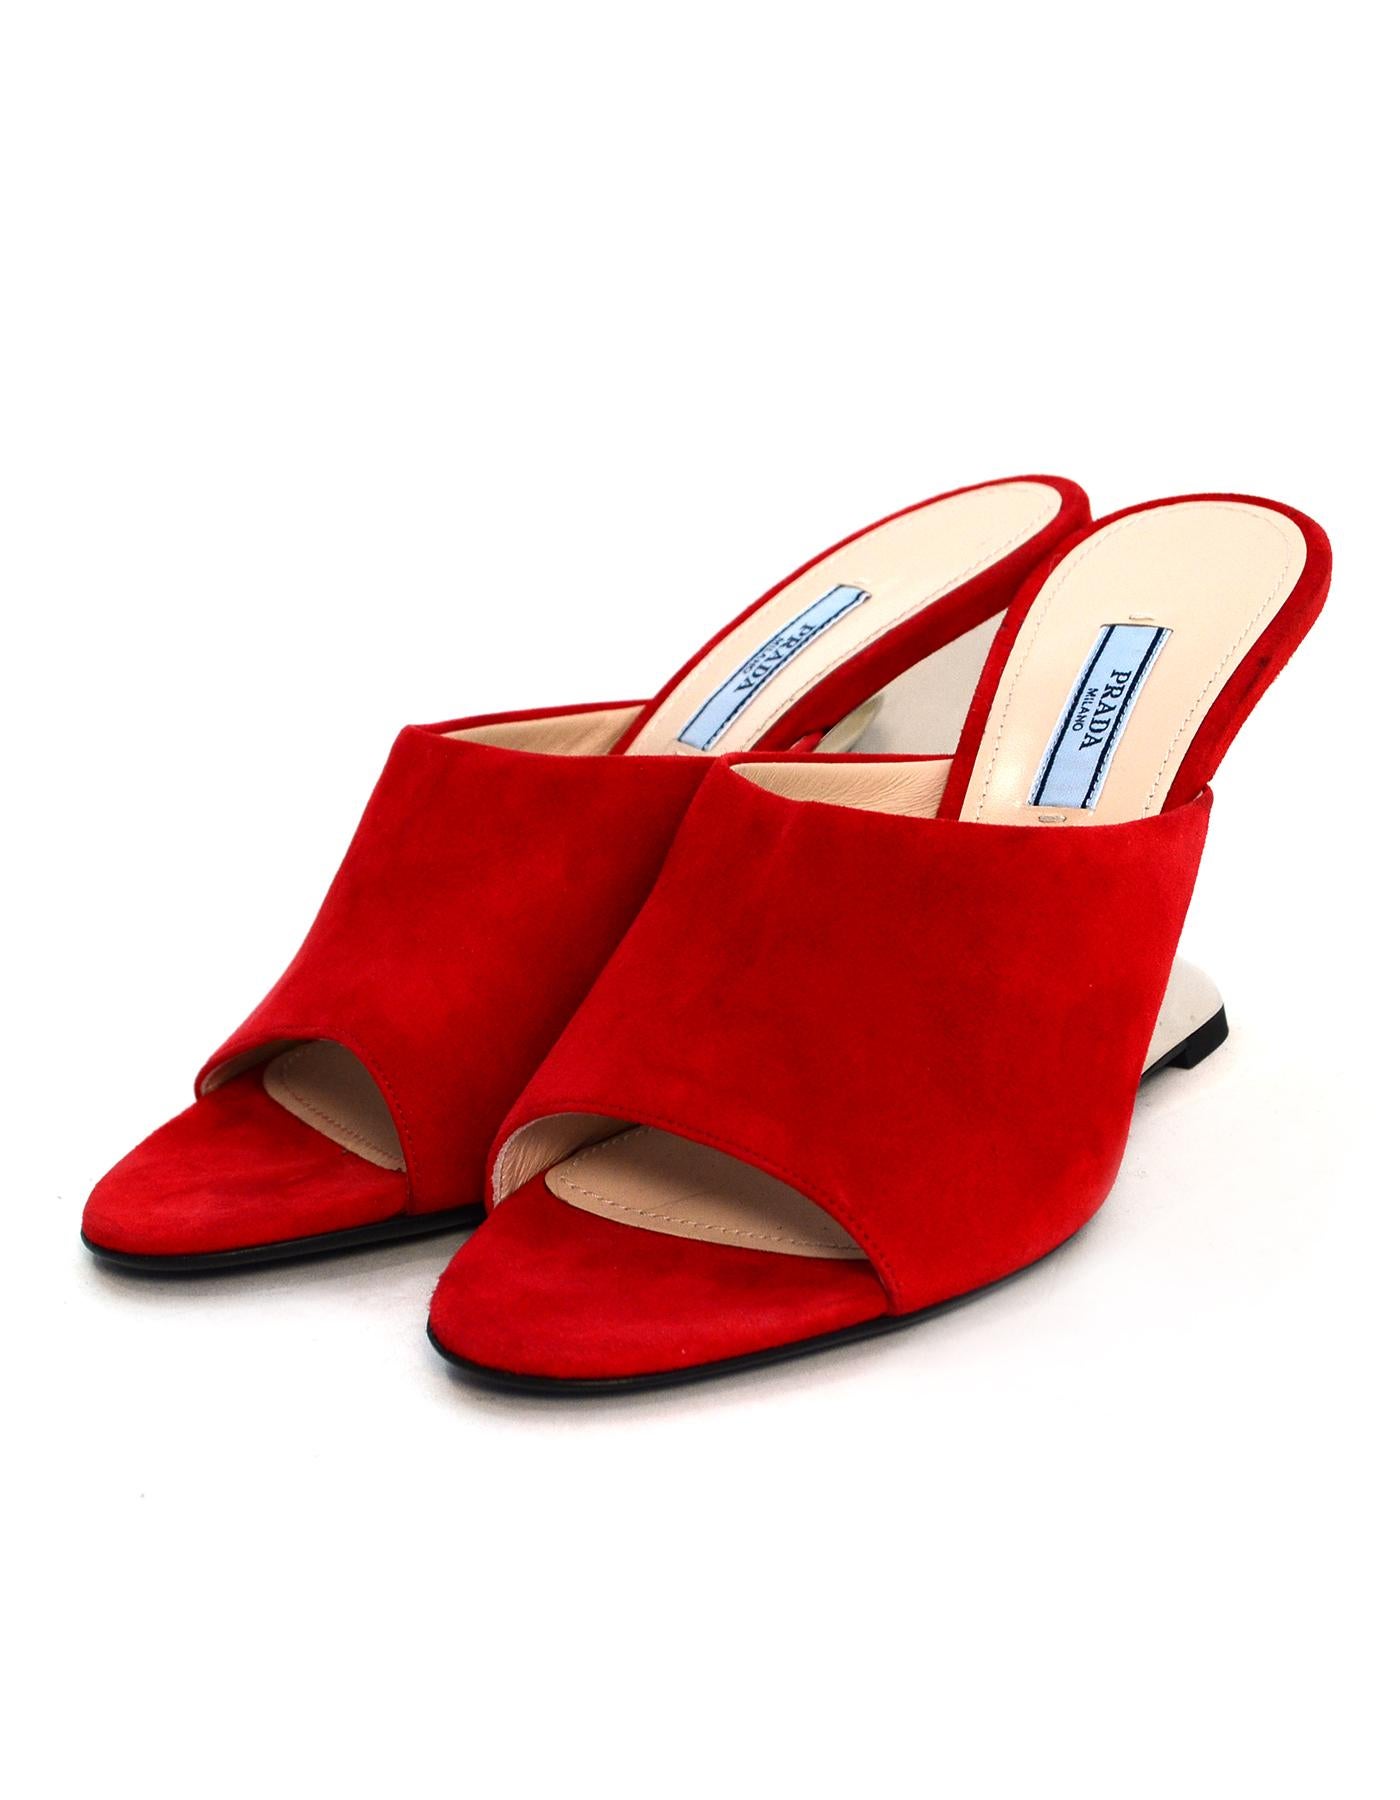 Prada Red Sculptural Metallic Wedge Heel Mules sz 39.5 rt $850

Made In: Italy
Color: Red
Materials: Suede
Closure/Opening: Slide on 
Overall Condition: New
Estimated Retail: $850 + tax
Marked Size: 39.5
Heel Height: 3.5